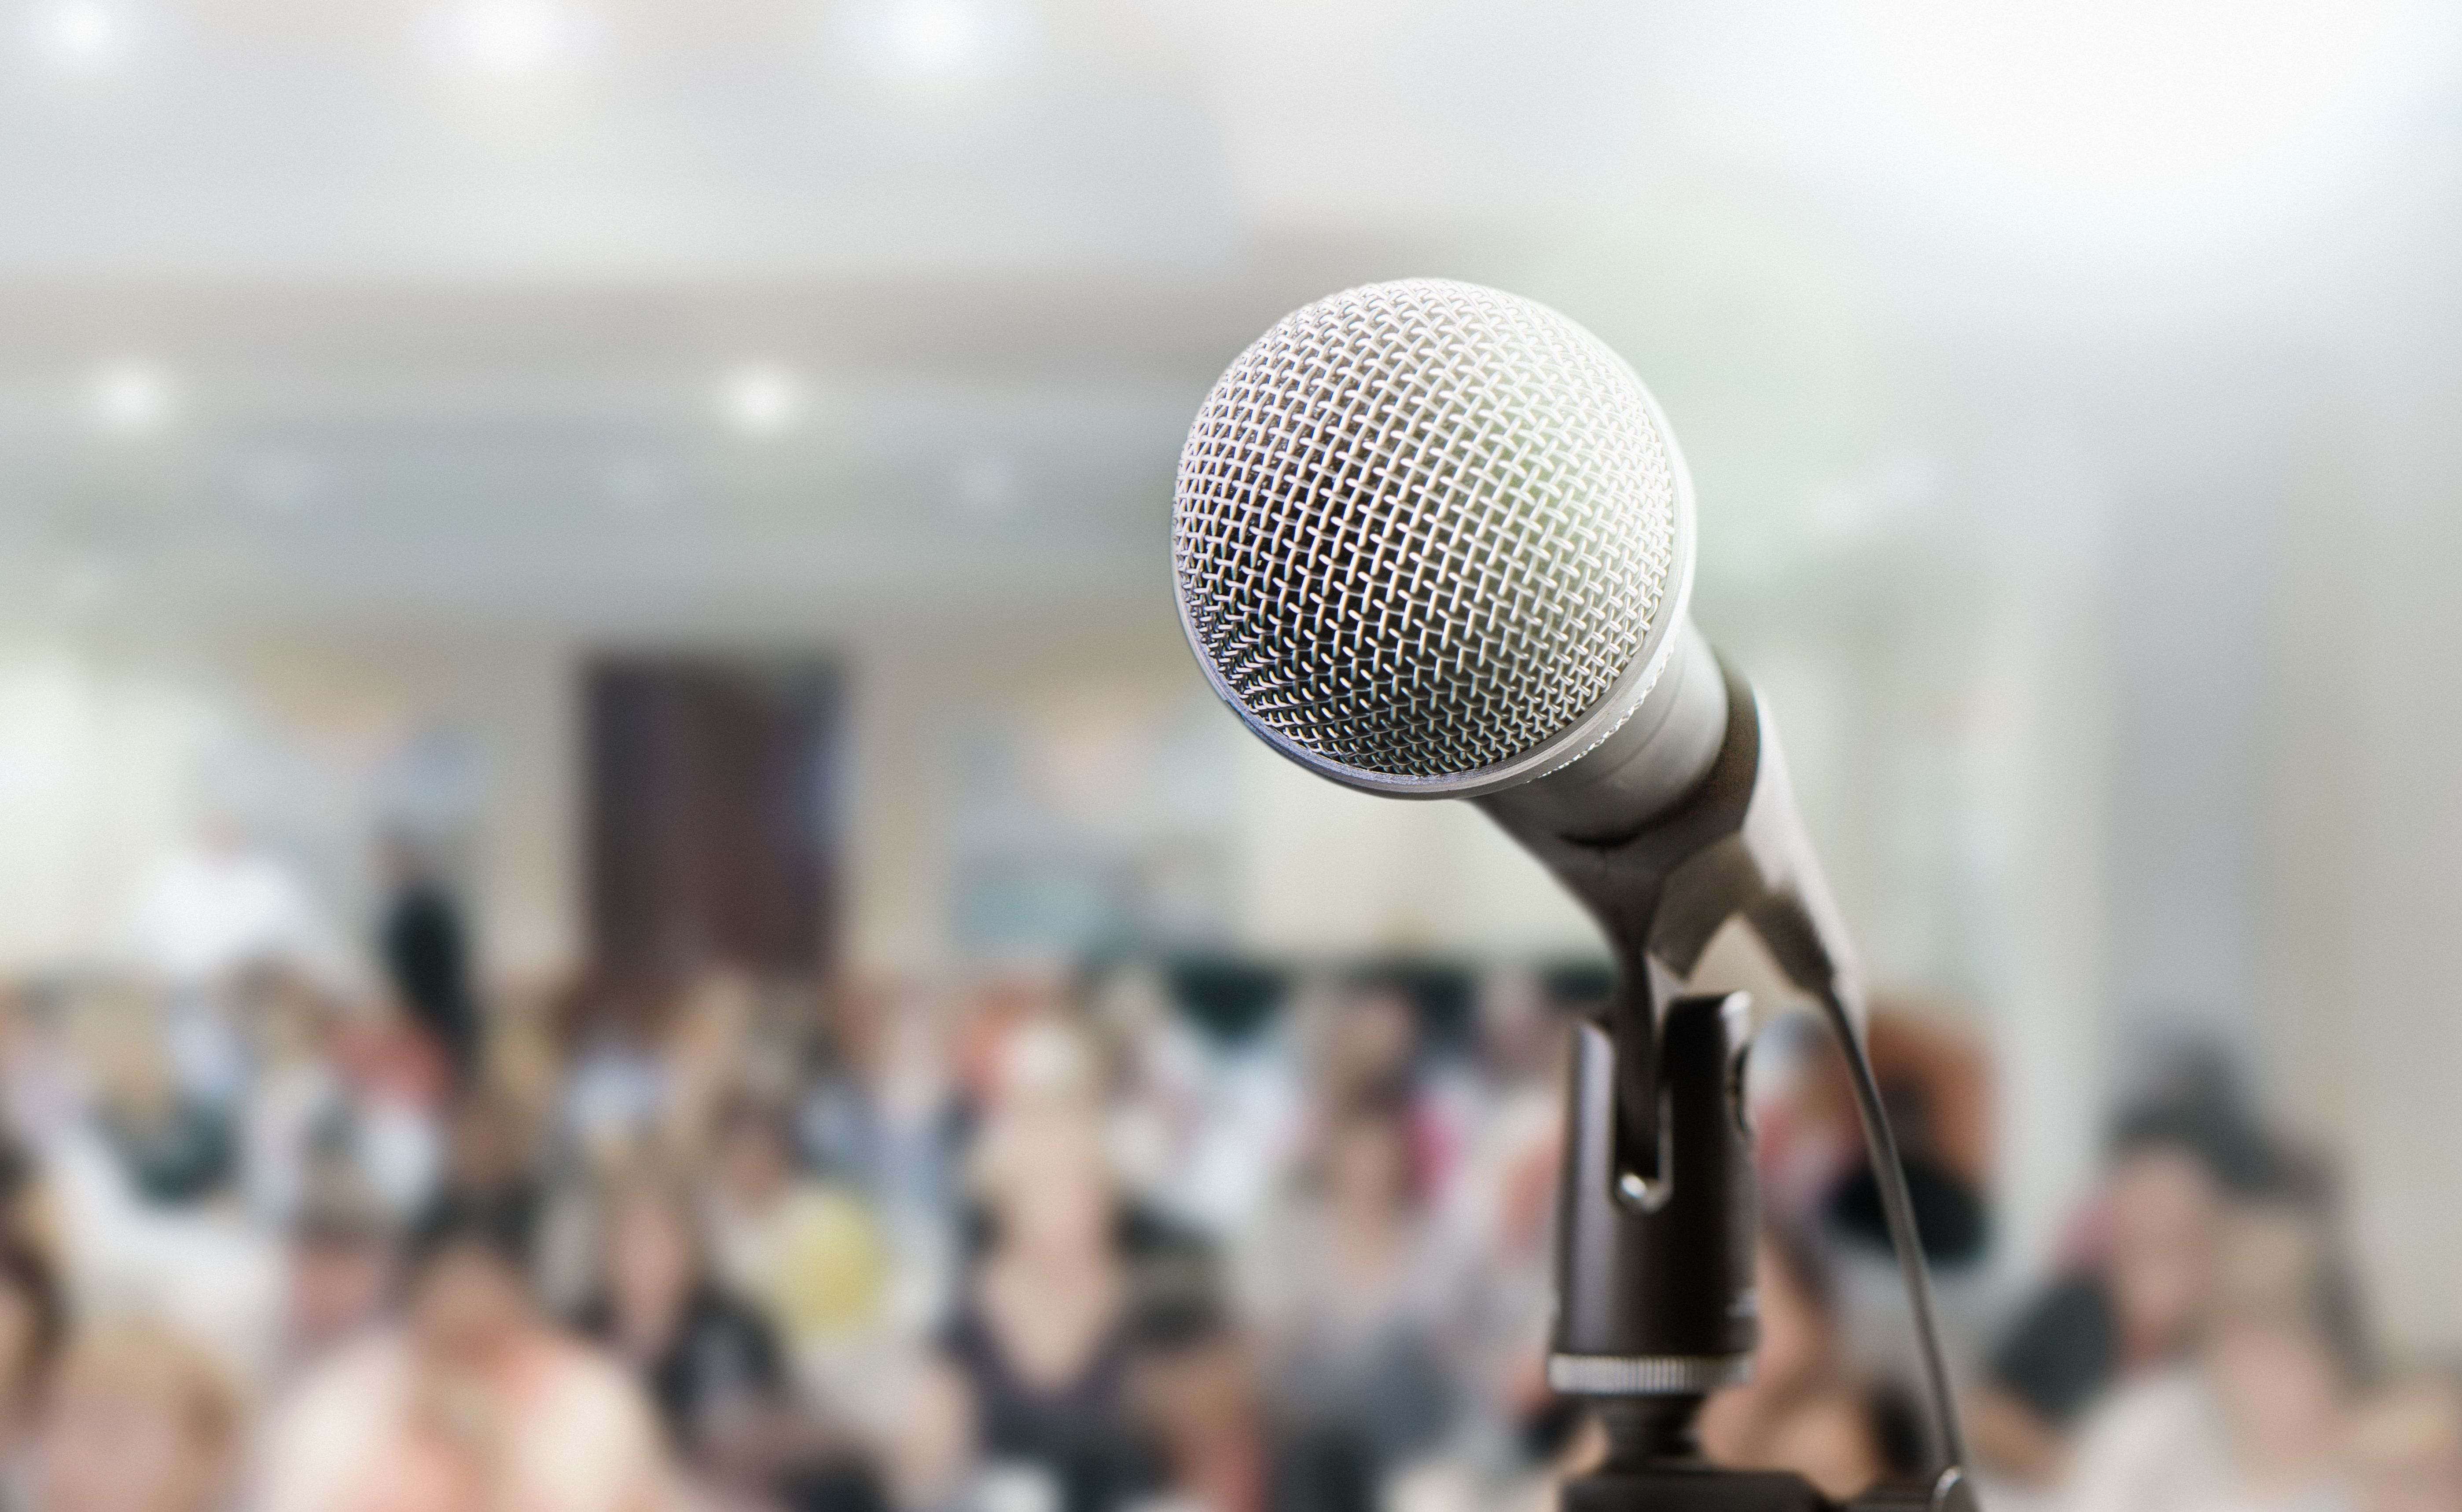 Image of a microphone in the foreground of a lecture hall